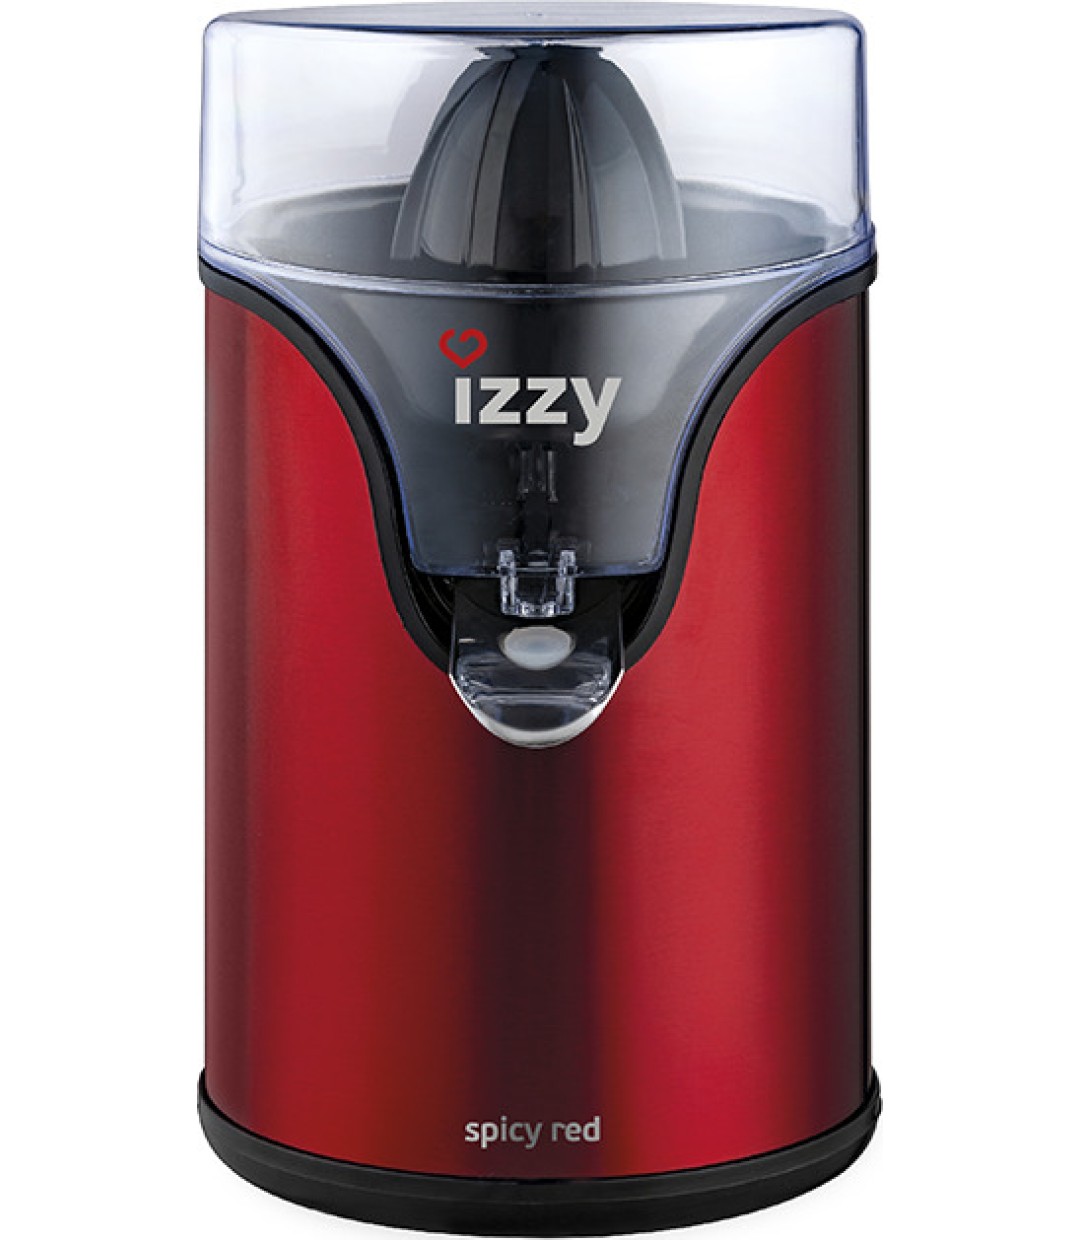 Izzy 402 Spicy Red